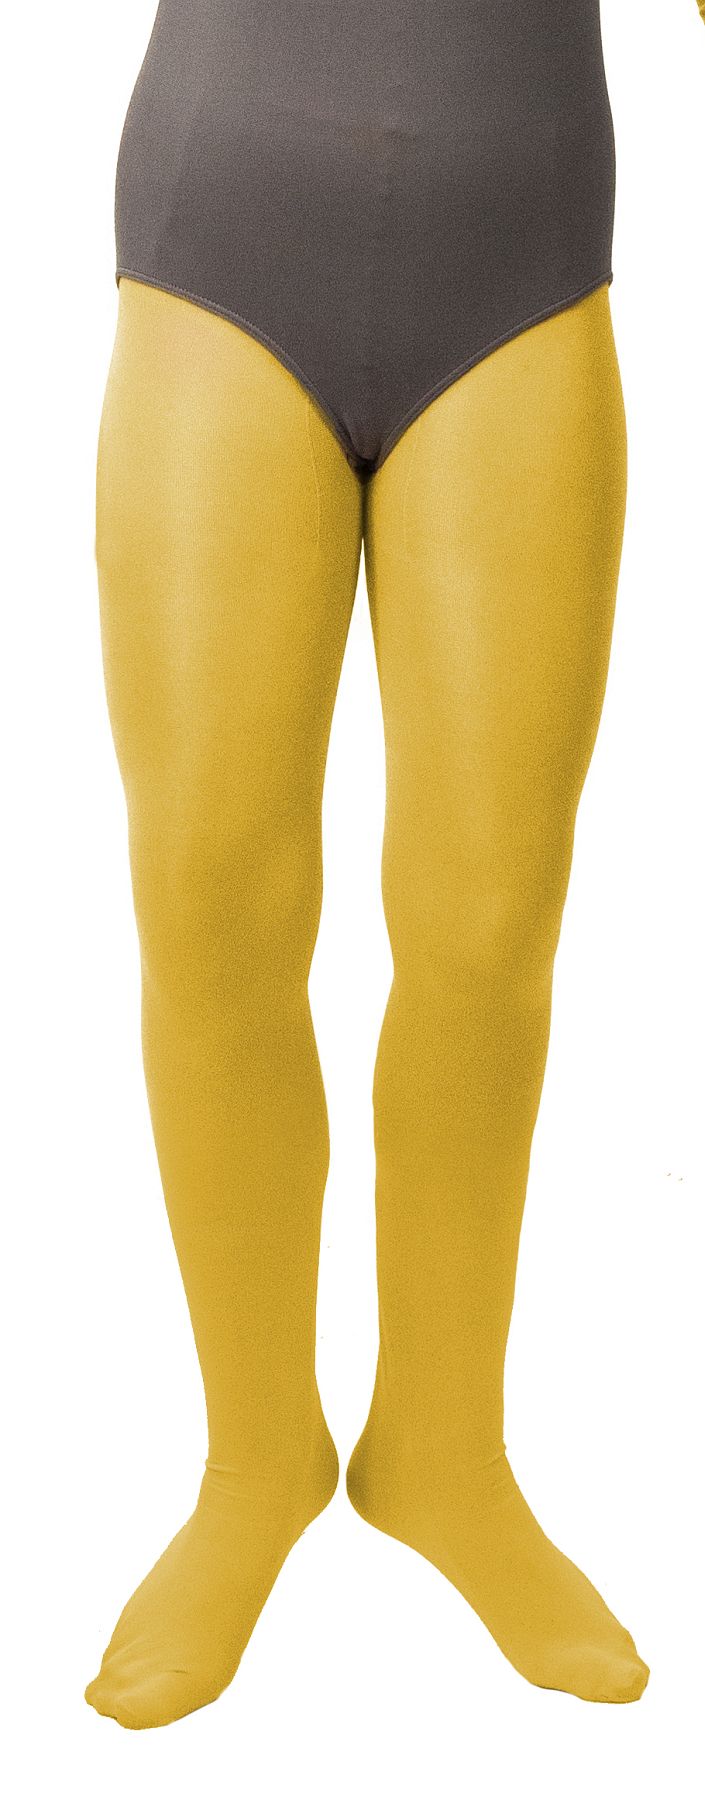 Opaque tights, yellow